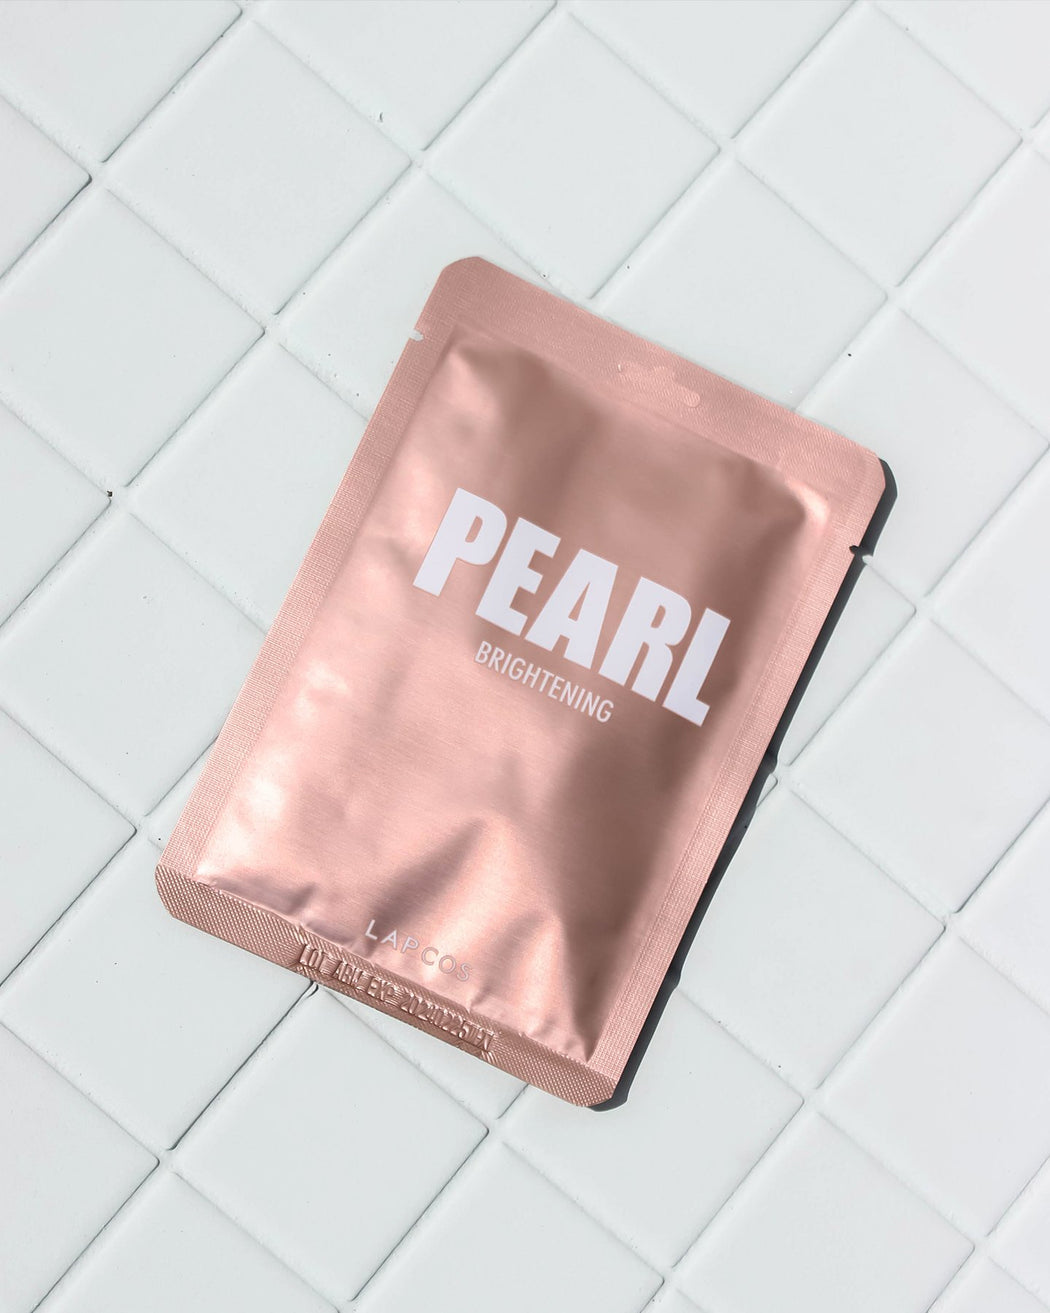 LAPCOS - Pearl Daily Sheet Mask